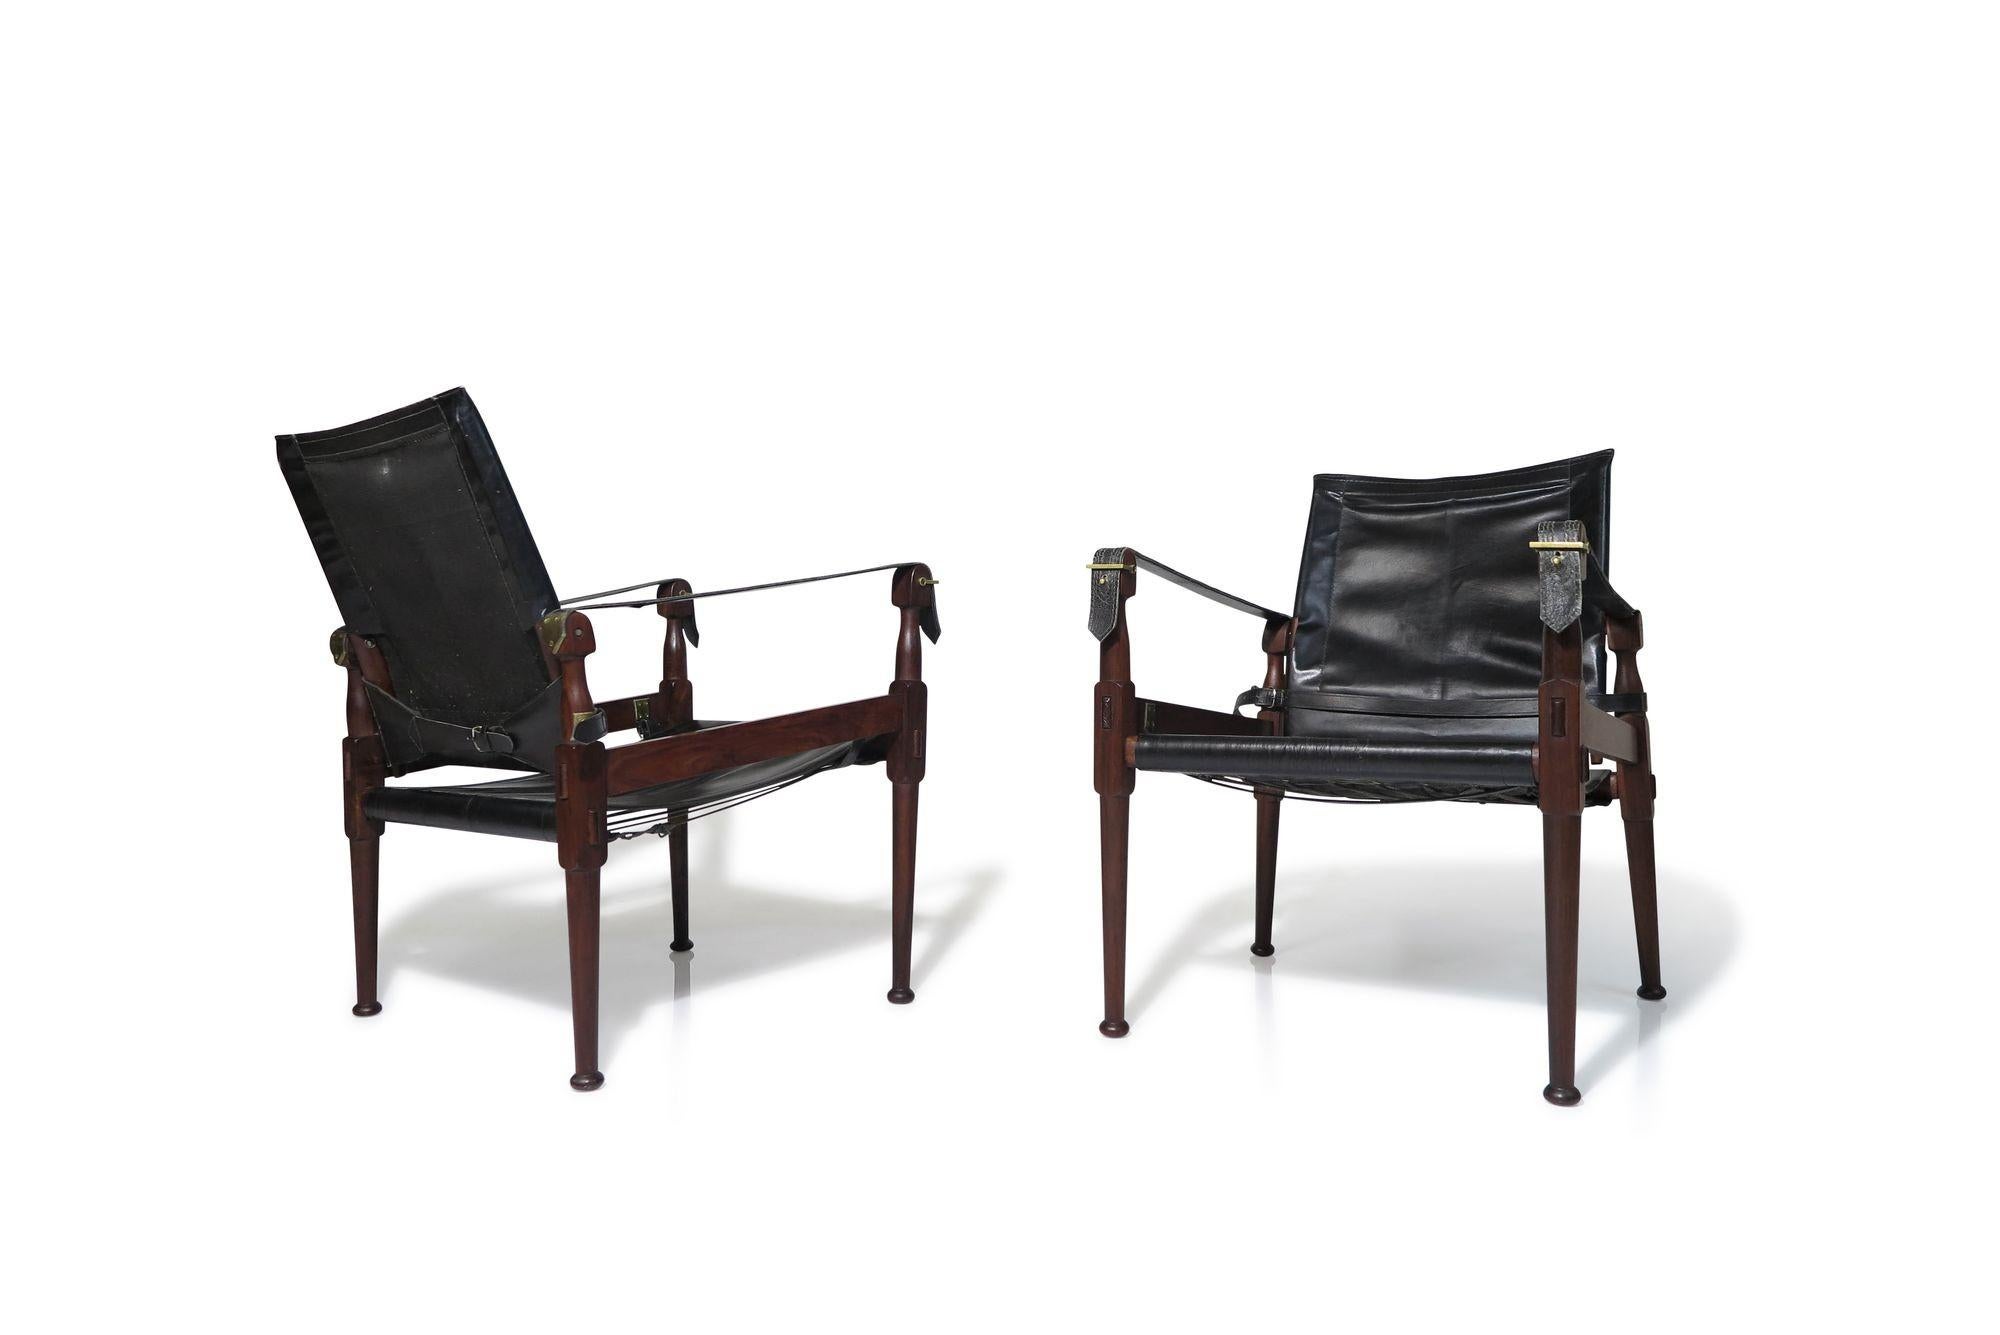 Safari chairs for Hayat Brothers, Pakistan, 1968.
The chairs are crafted of rosewood and black leather with brass details. Makers mark.

Measurements
W 21.25'' x D 27.25'' x H 29.5''
Seat Height 15''